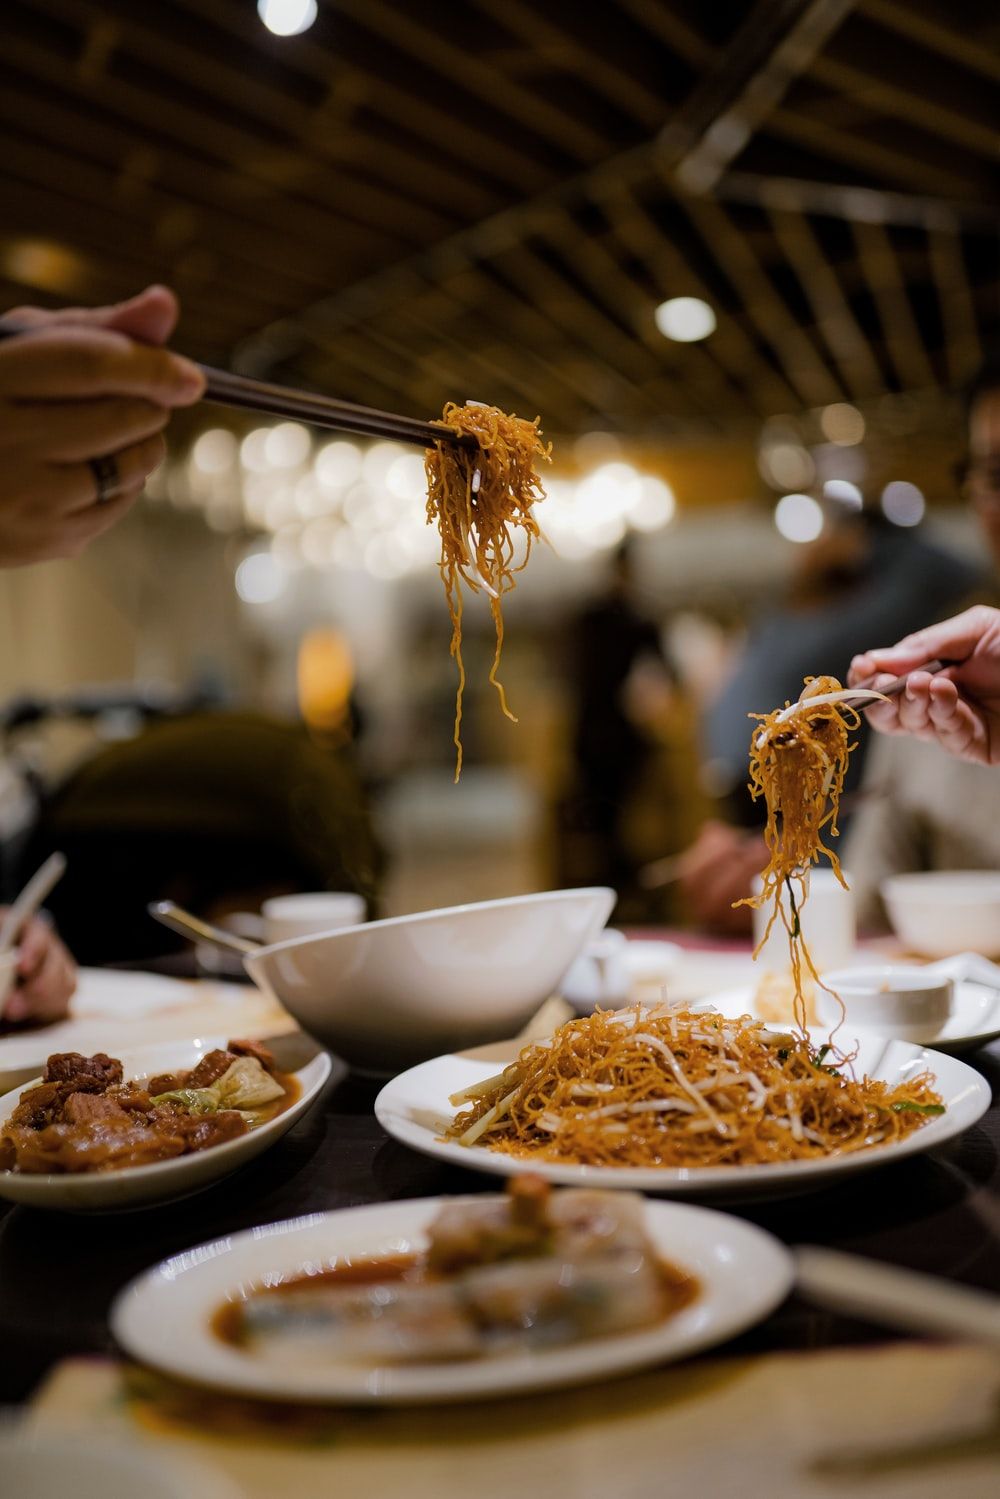 Chinese Food Picture HD .com